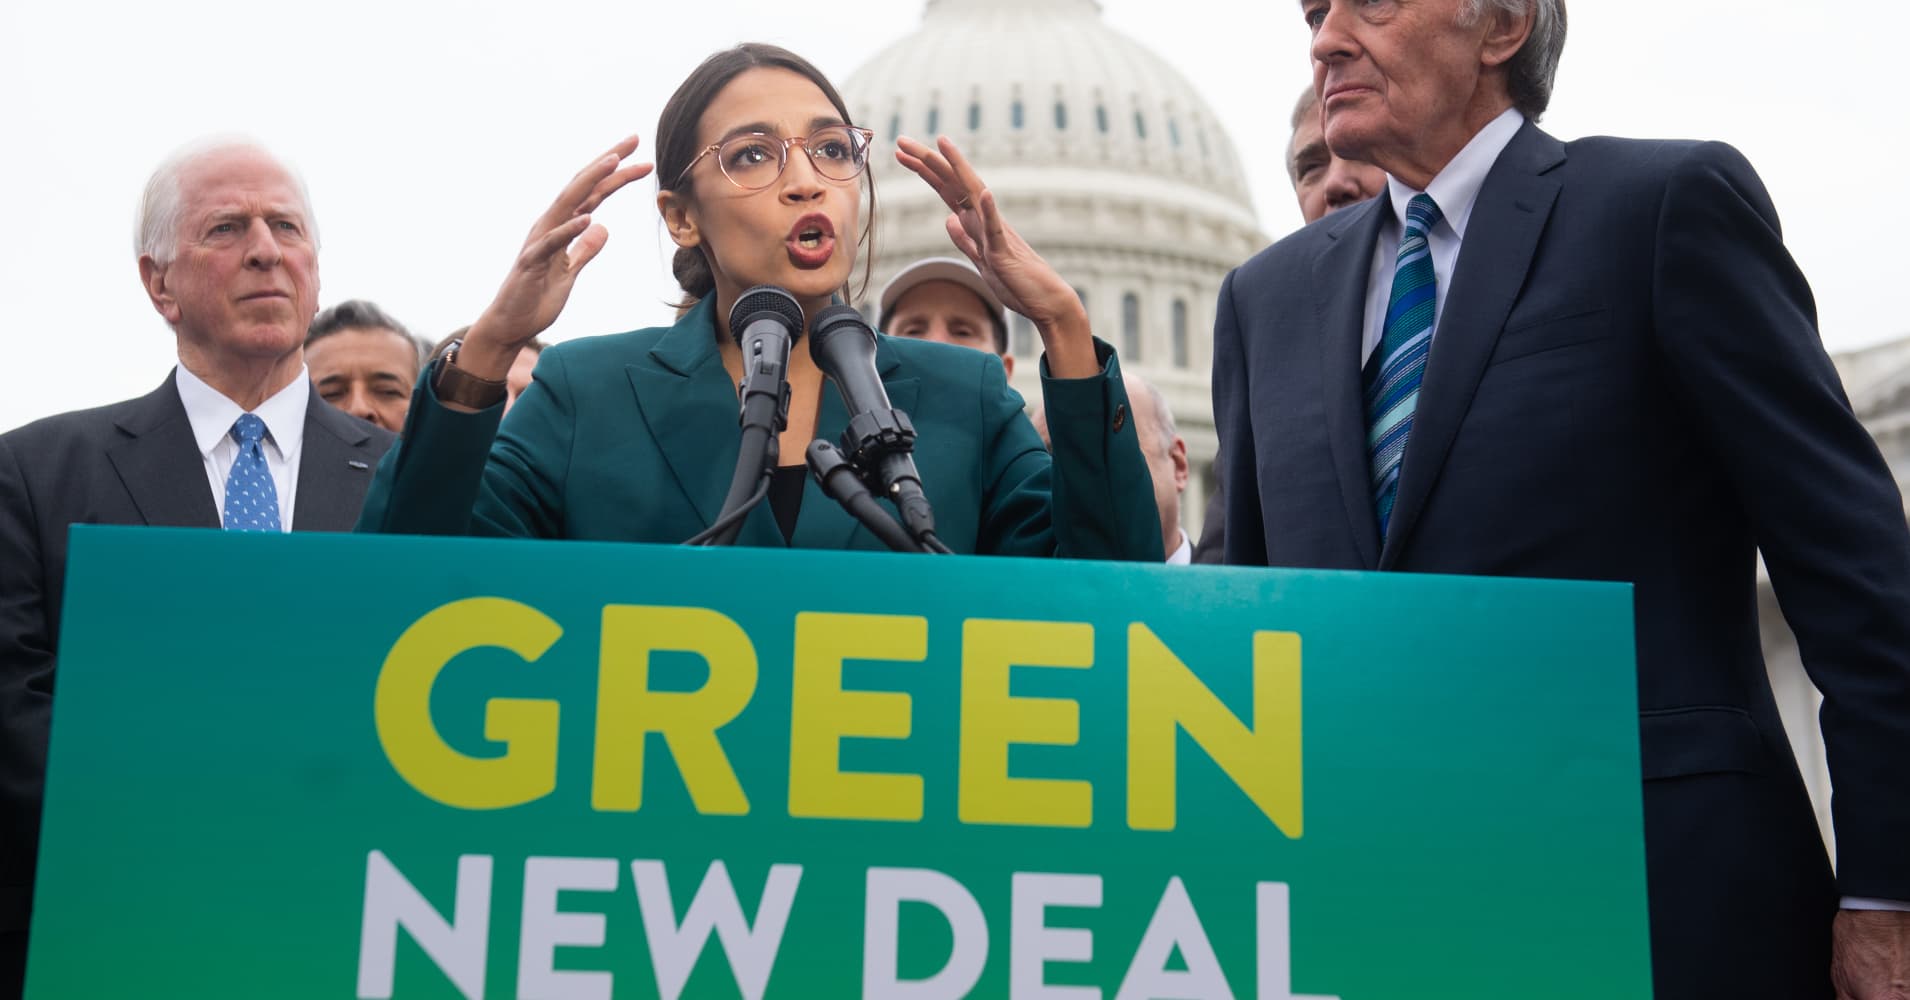 Democrats launch the Green New Deal resolution